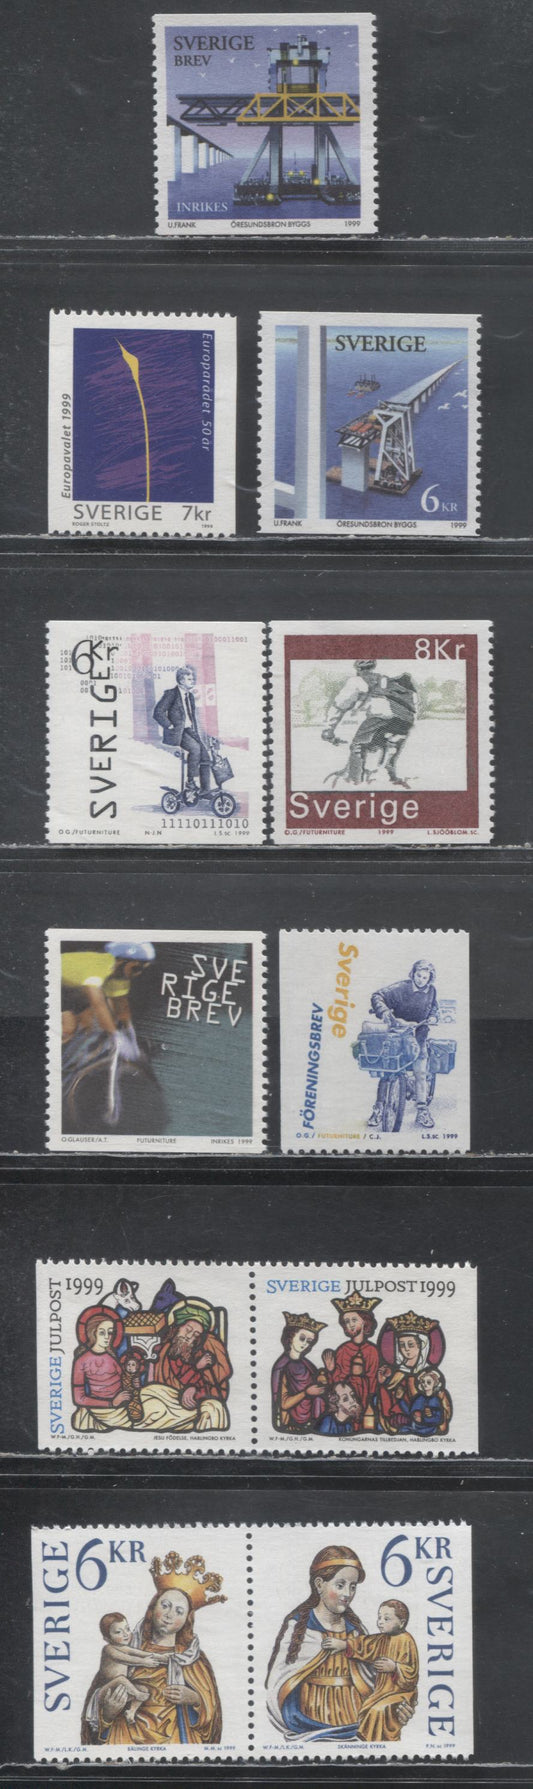 Sweden SC#2337/2364 1999 Oresund Bridge Construction  - 1999 Christmas Issues, 7 VFNH Singles And Two Booklet Pairs, 2017 Scott Cat. $25